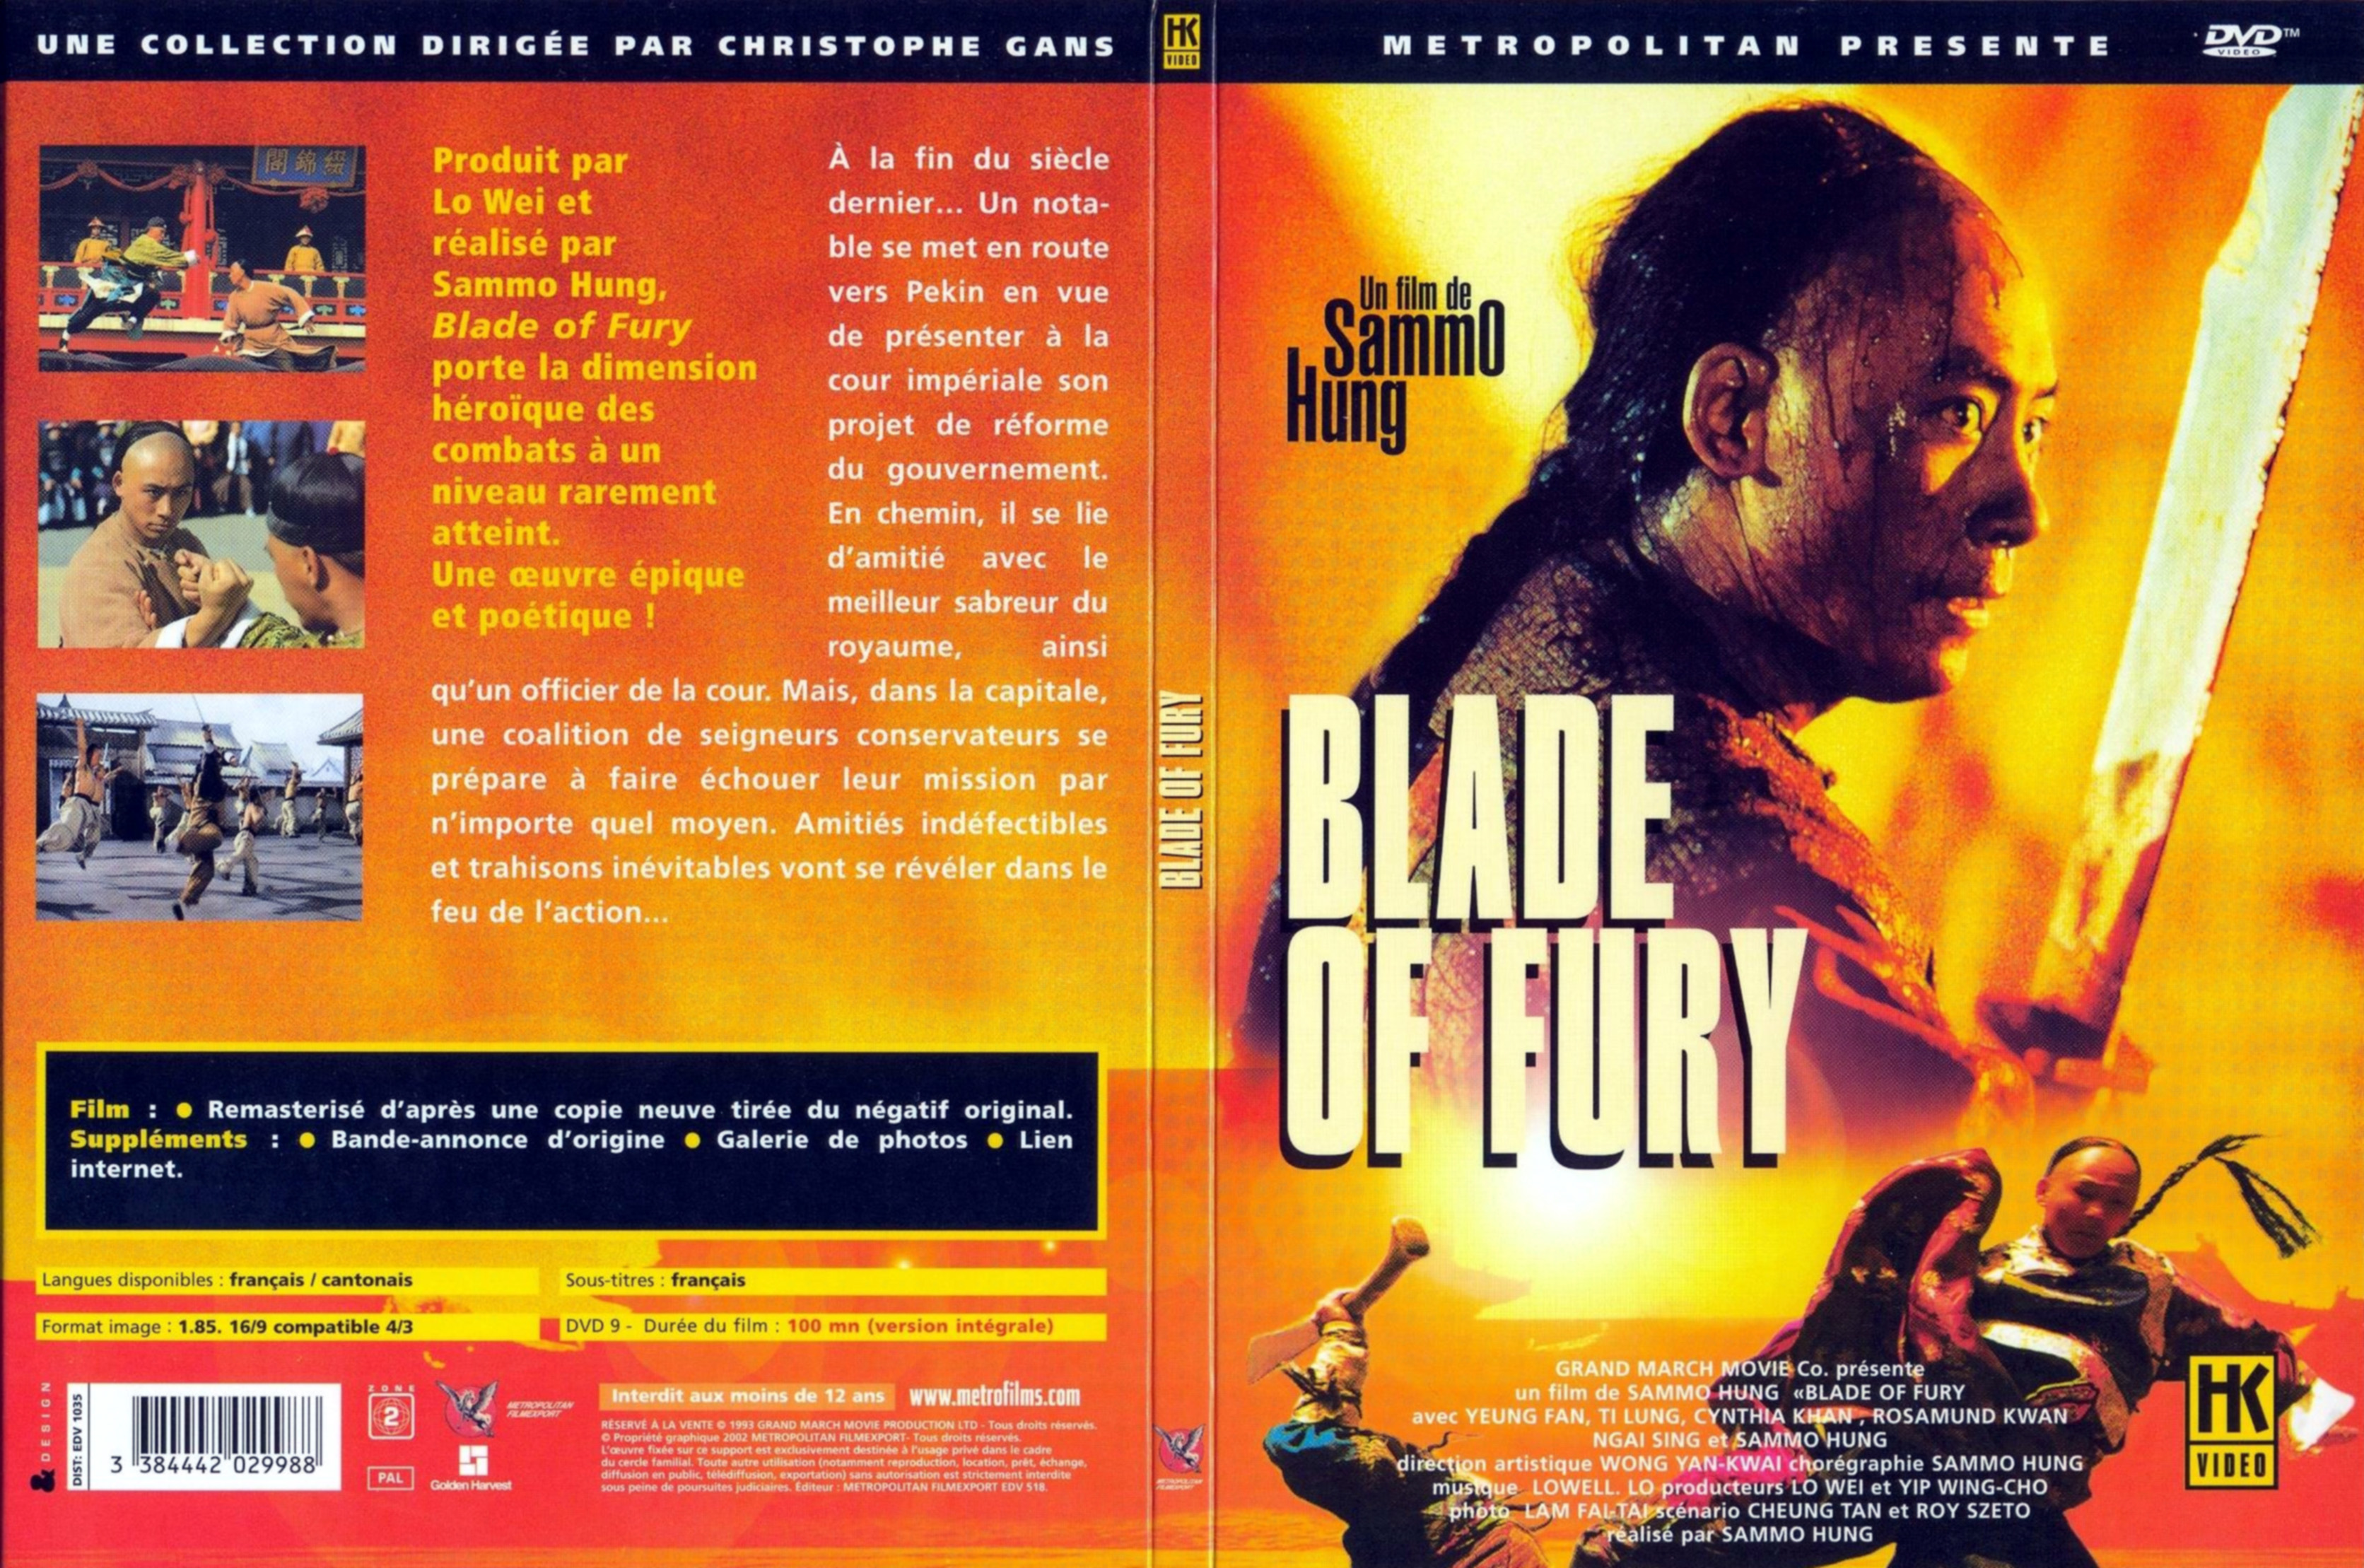 Jaquette DVD Blade of fury